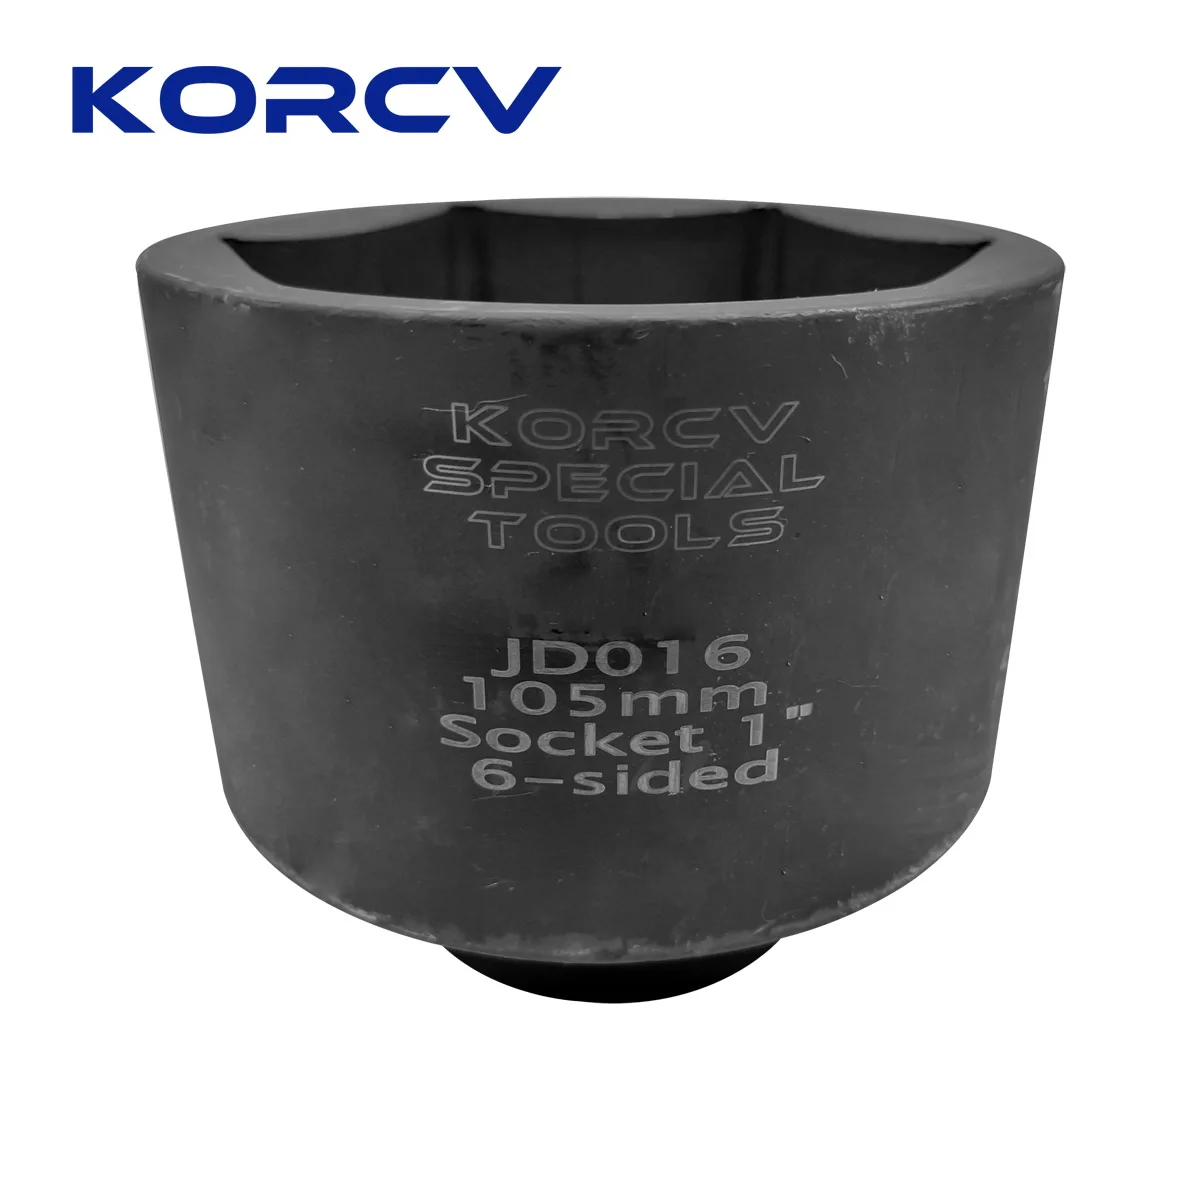 Special Tools for Volvo Scania Man Daf Iveco Renault Benz Trucks JD016 Socket 105 mm 6-sided 9996457